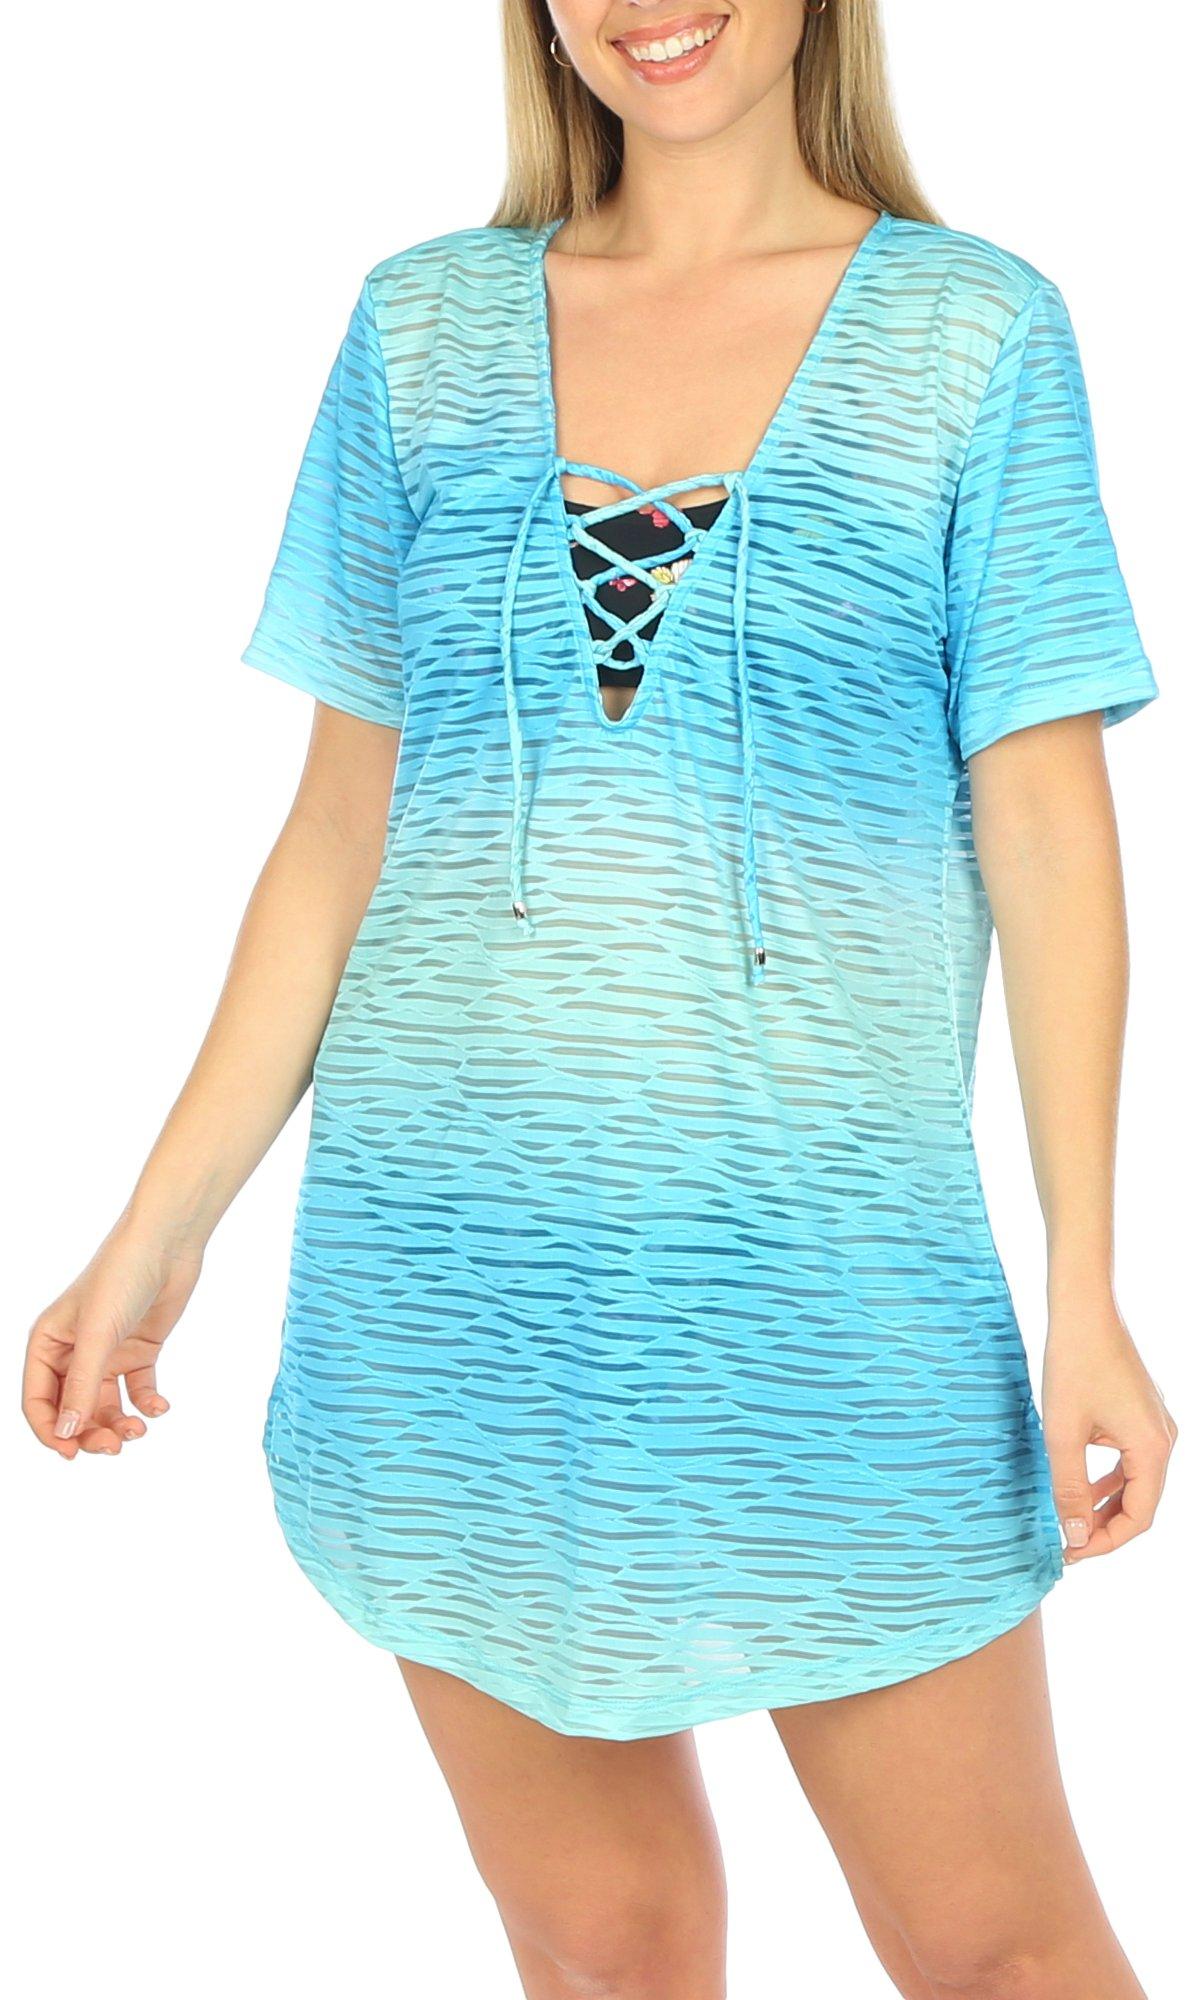 Pacific Beach Womens Ombre Lace Up Coverup